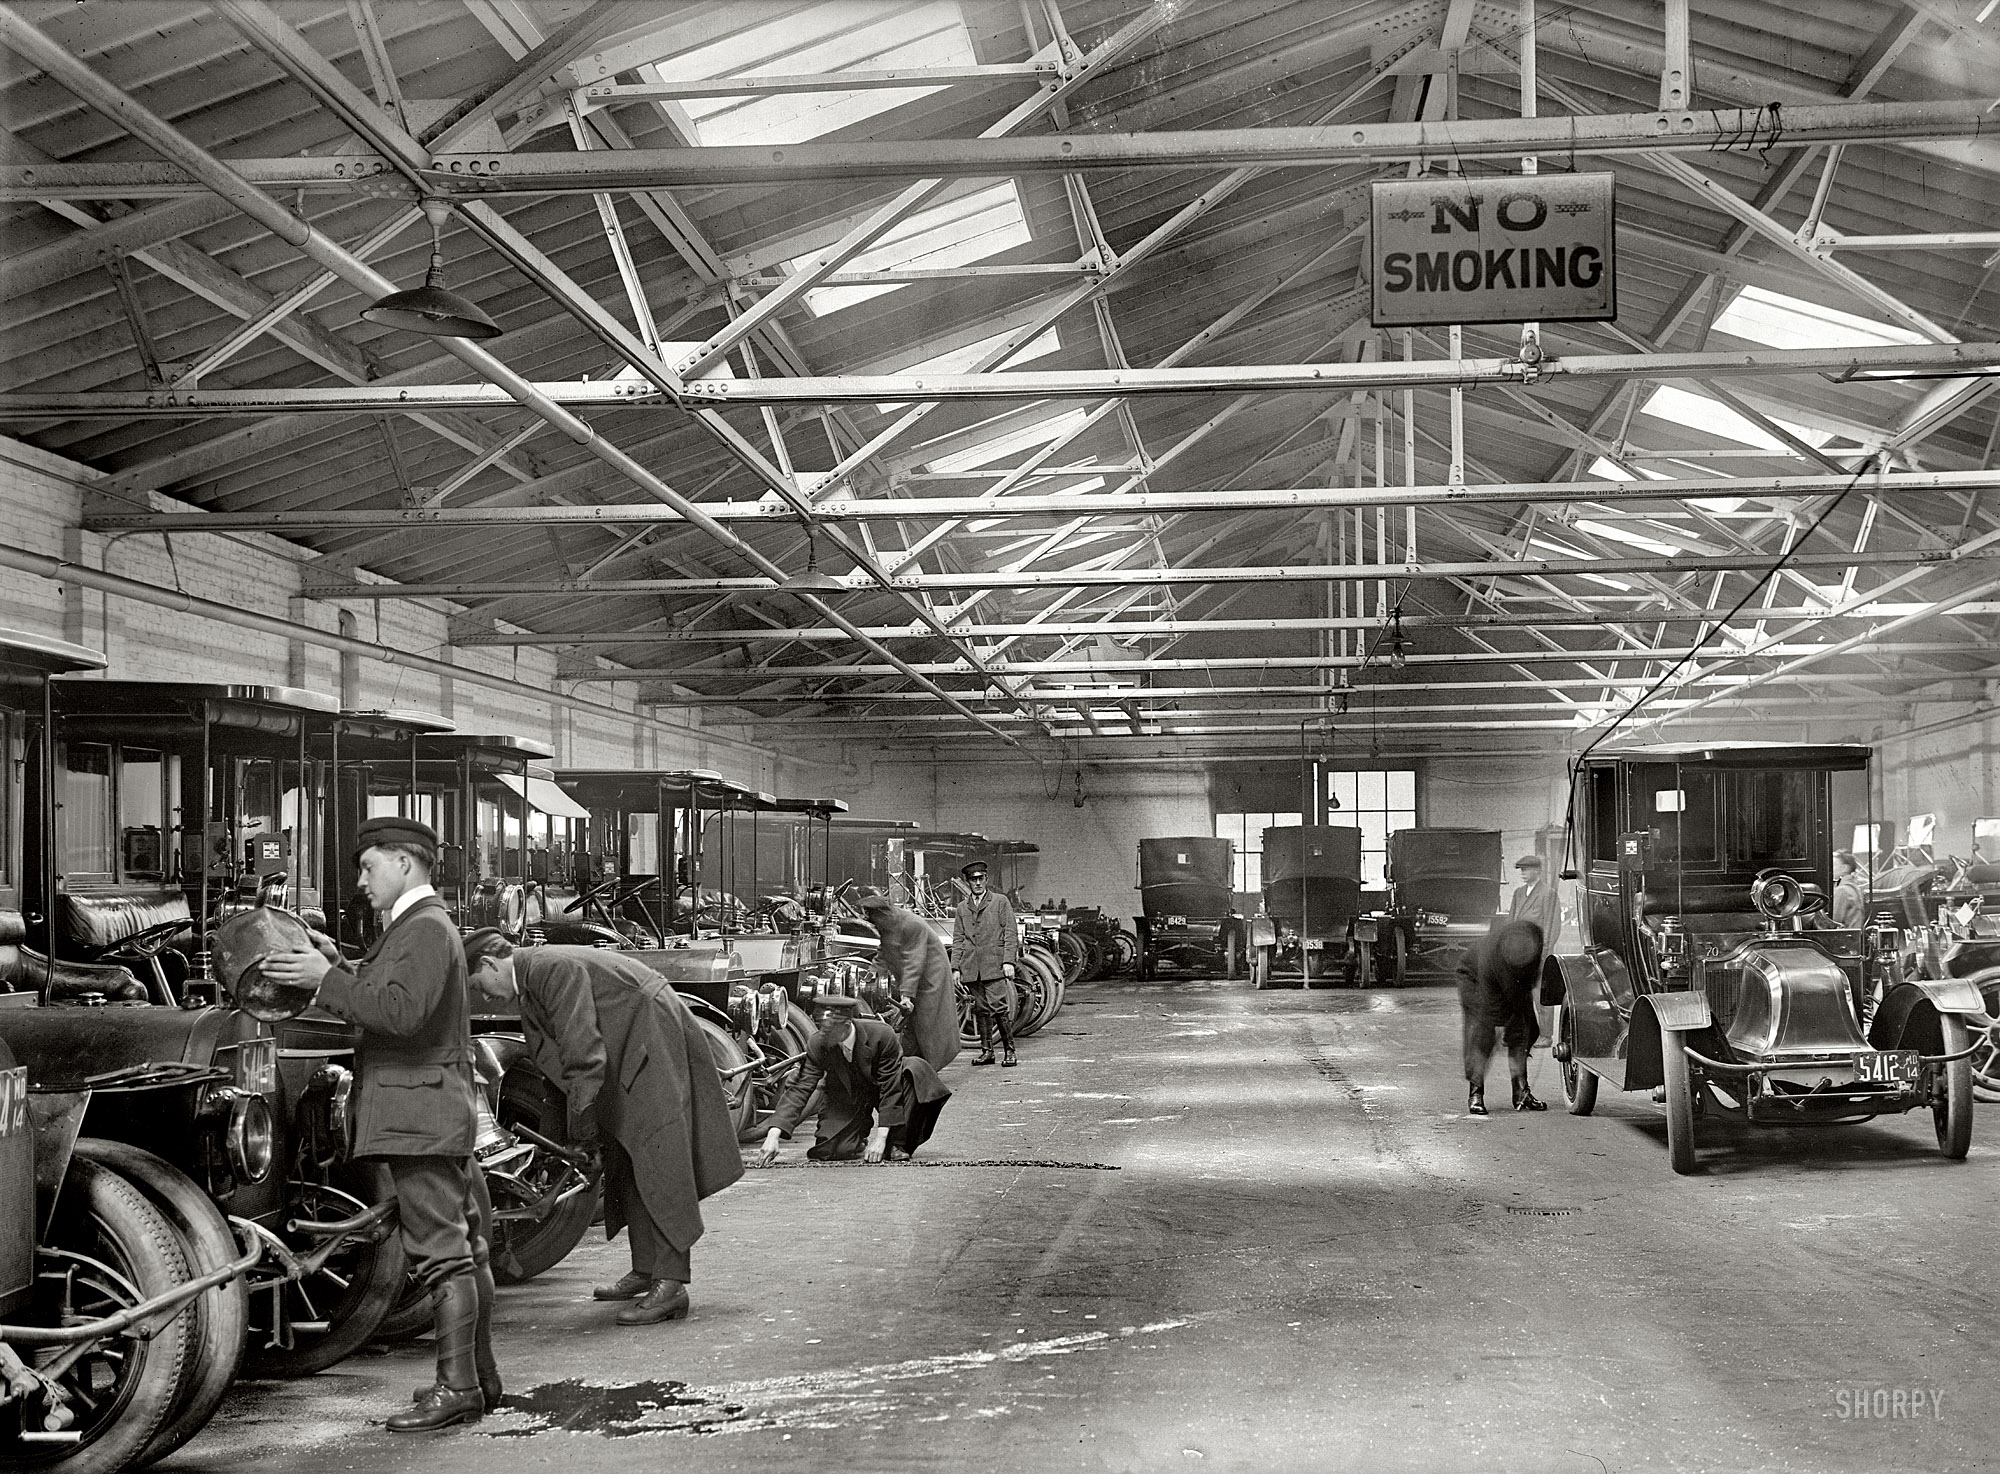 Washington, D.C., 1914. "Federal taxicab garage, 13th Street." These cabs served Union Station. Harris & Ewing Collection glass negative. View full size.